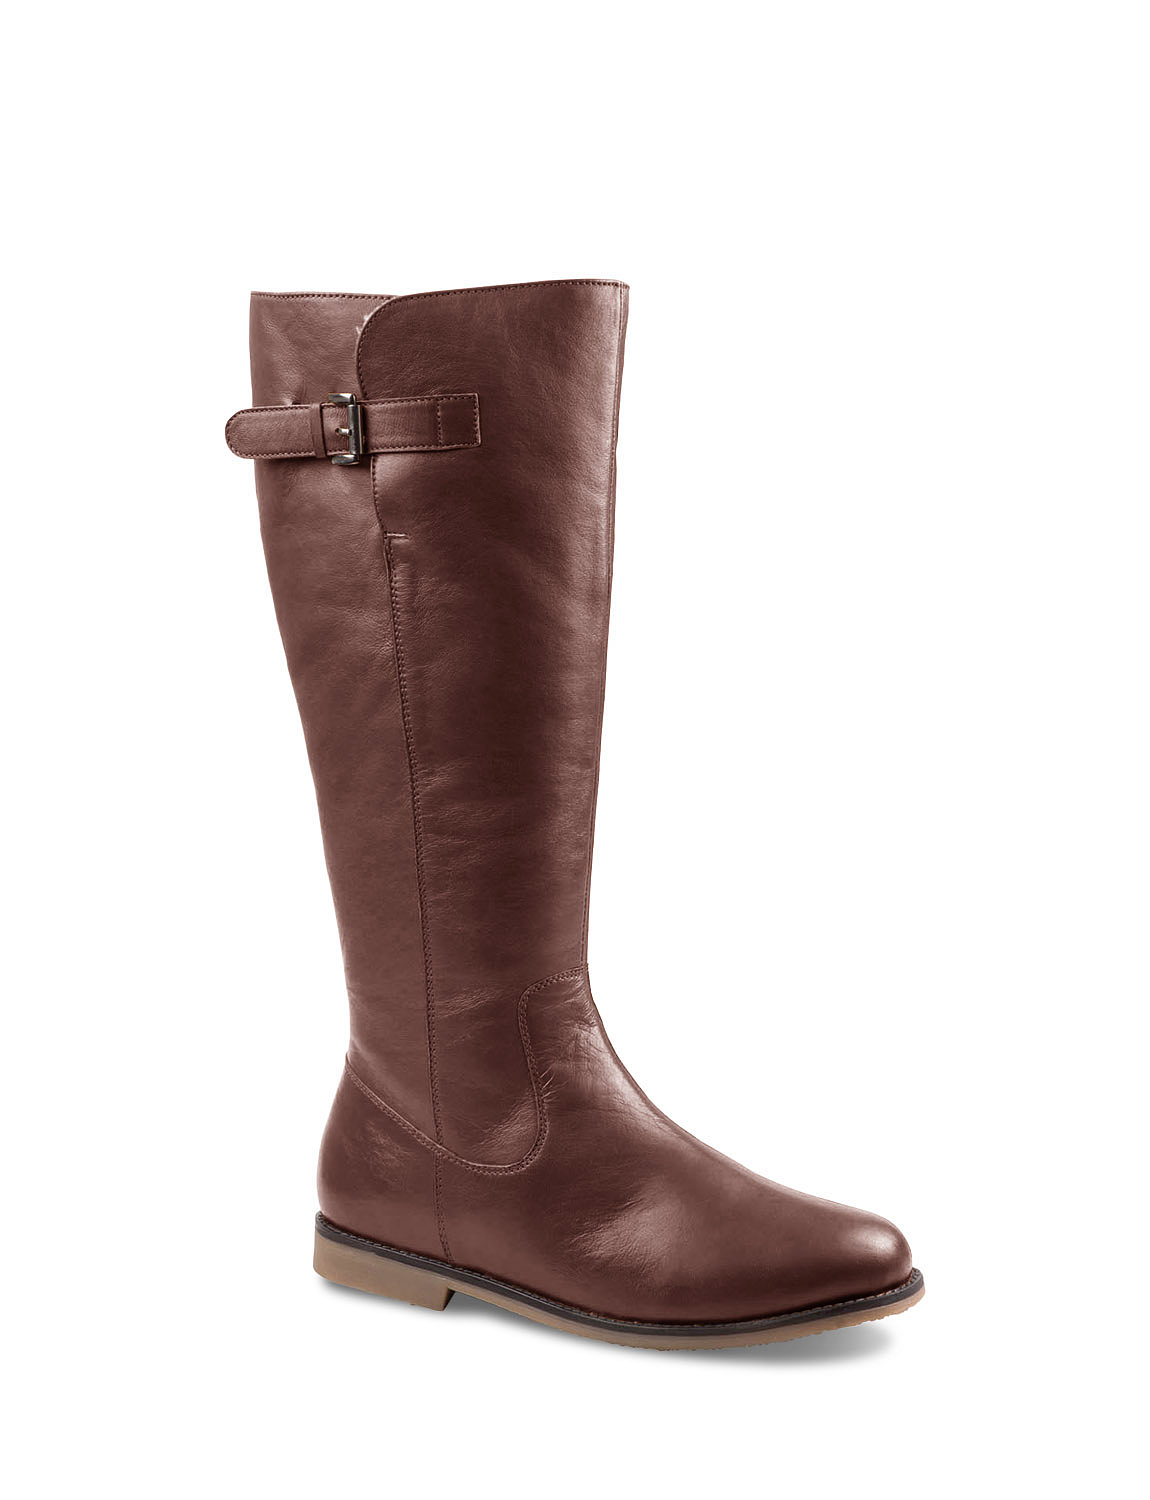 Leather Zip Boot with Thermal Lining | Chums